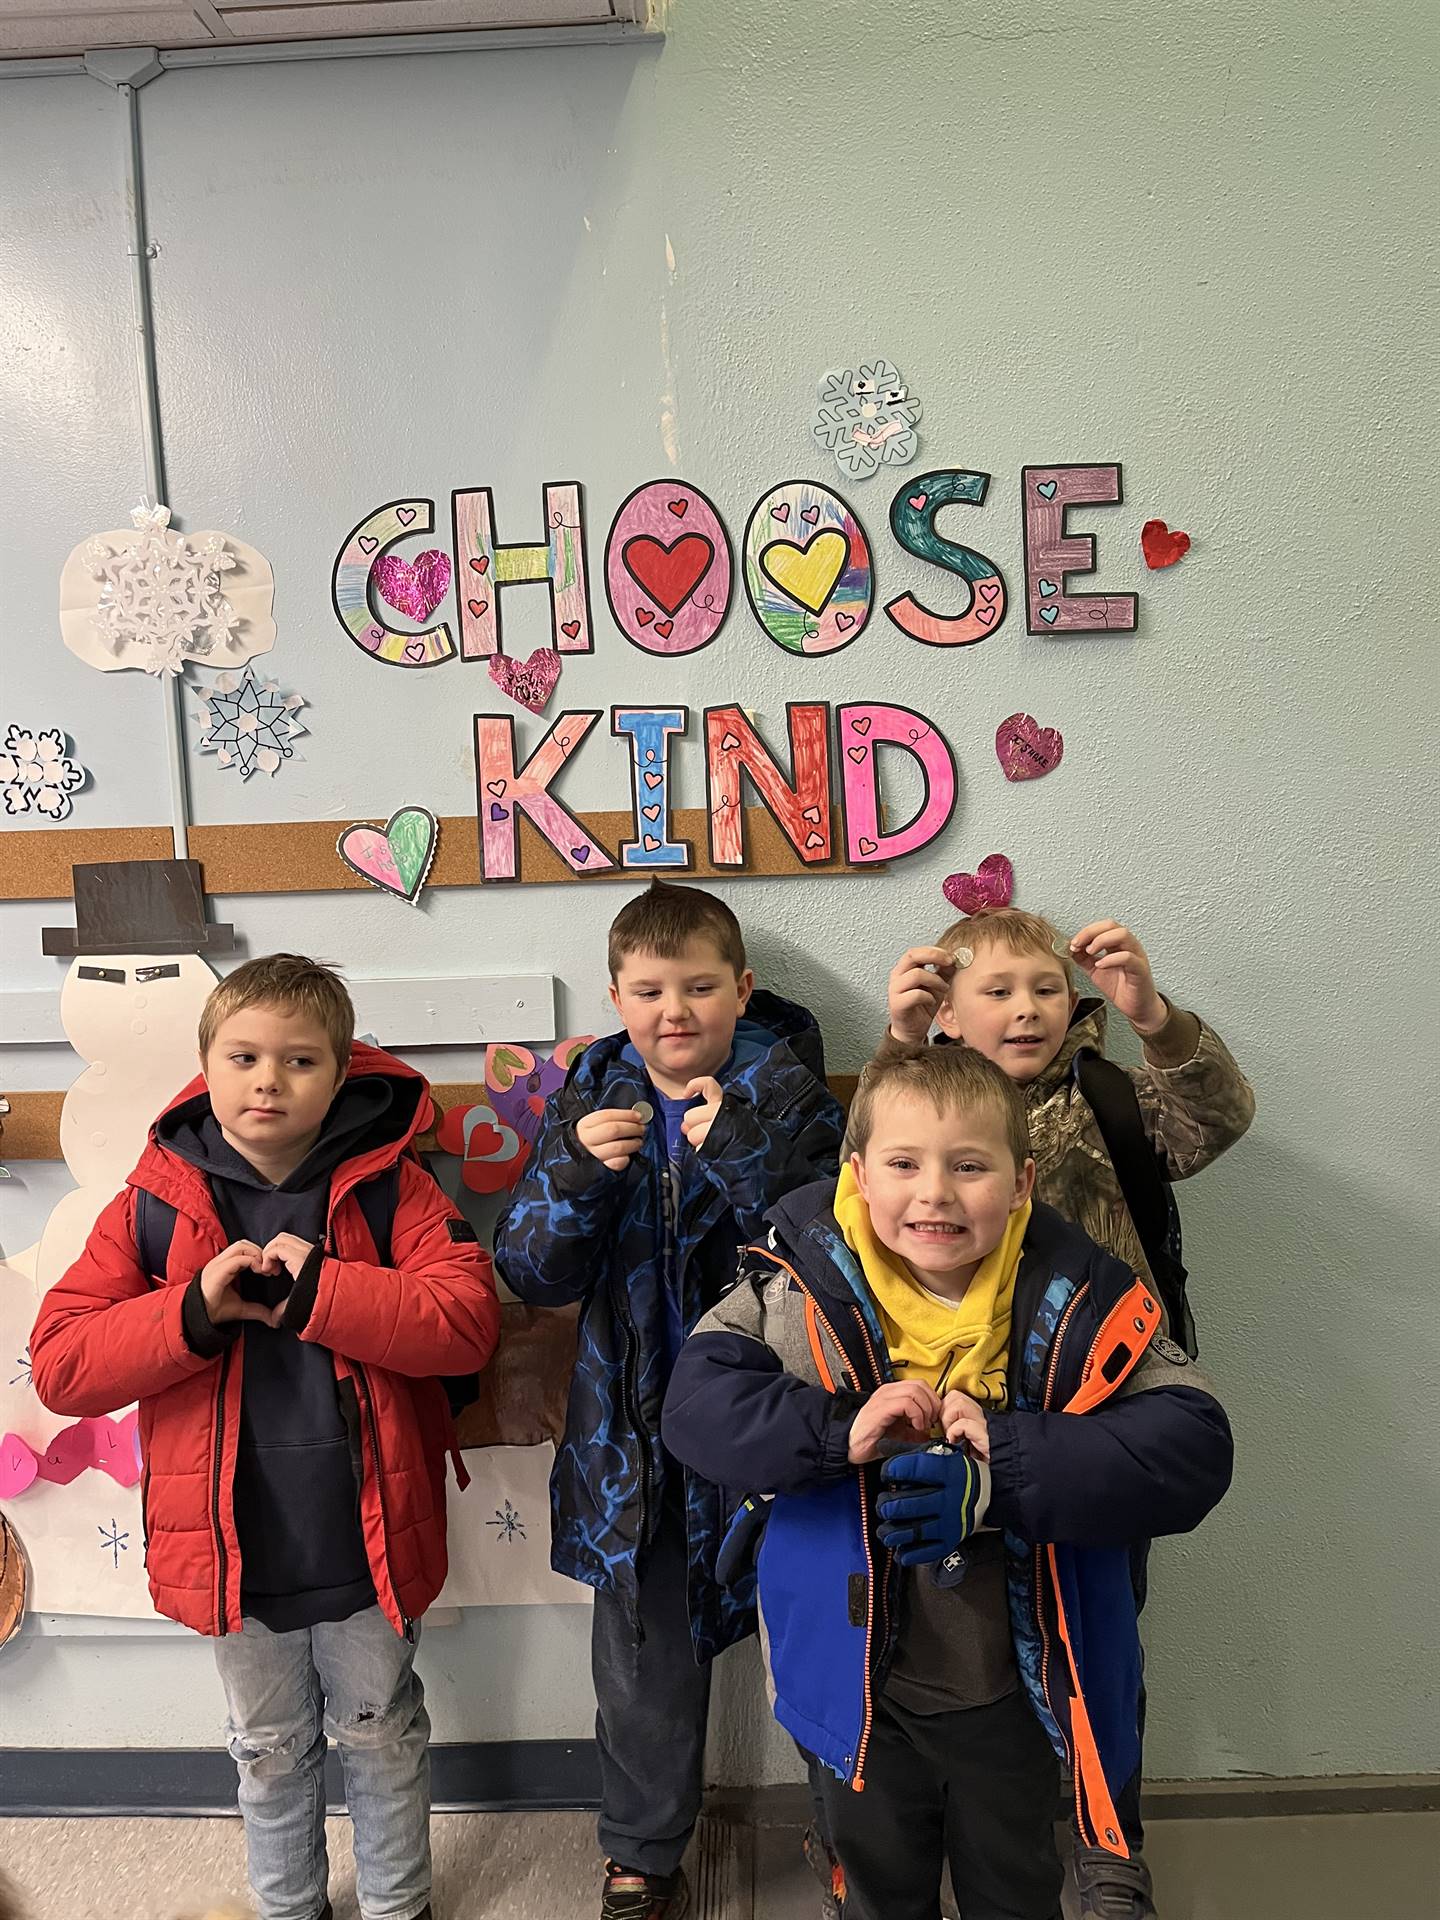 Students with hands over hearts and "CHOOSE KIND" letters